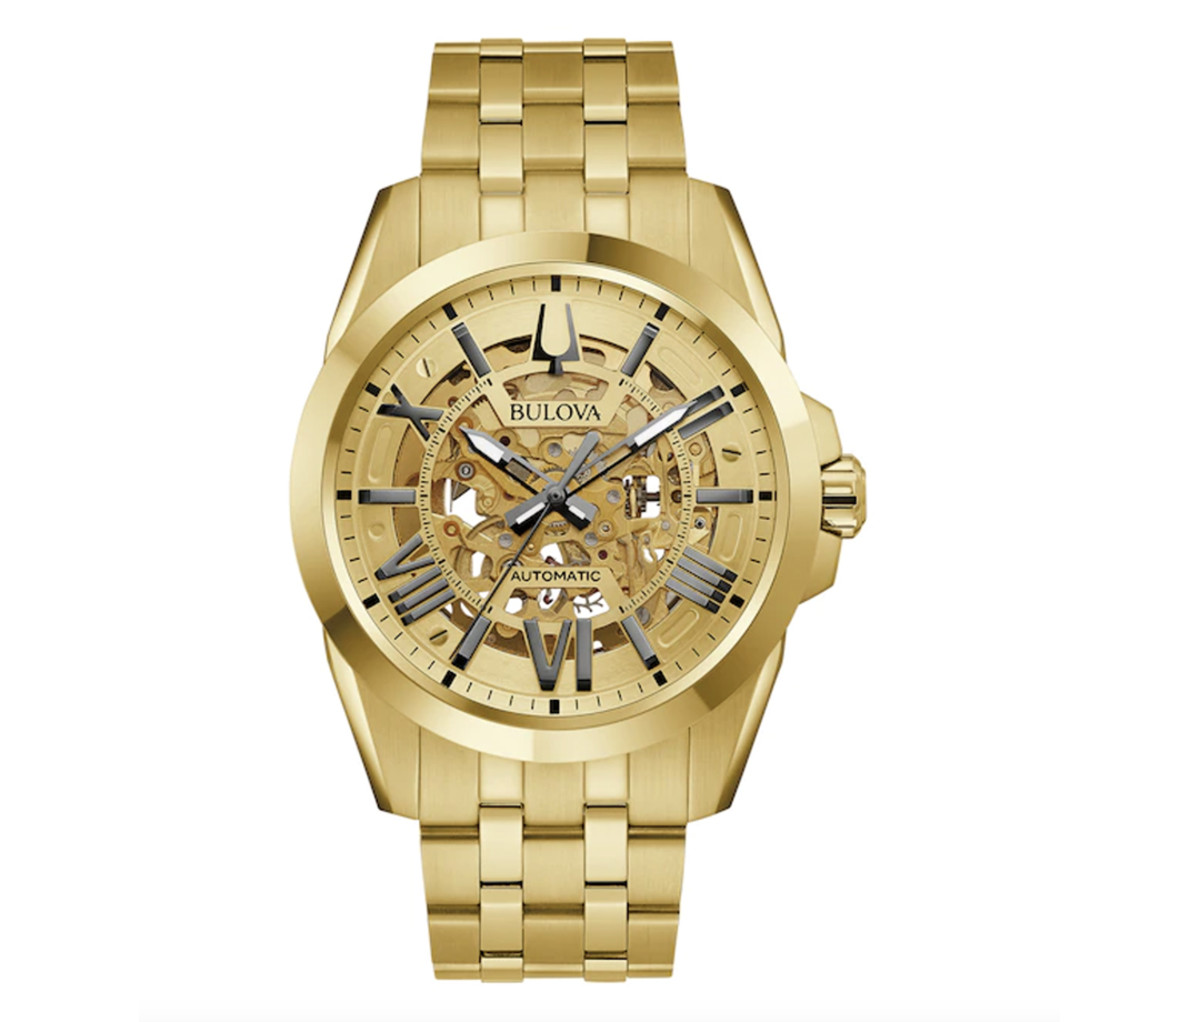 The Best Real Gold Watches For Men In 2022 From $149 To $32K - Men'S Journal